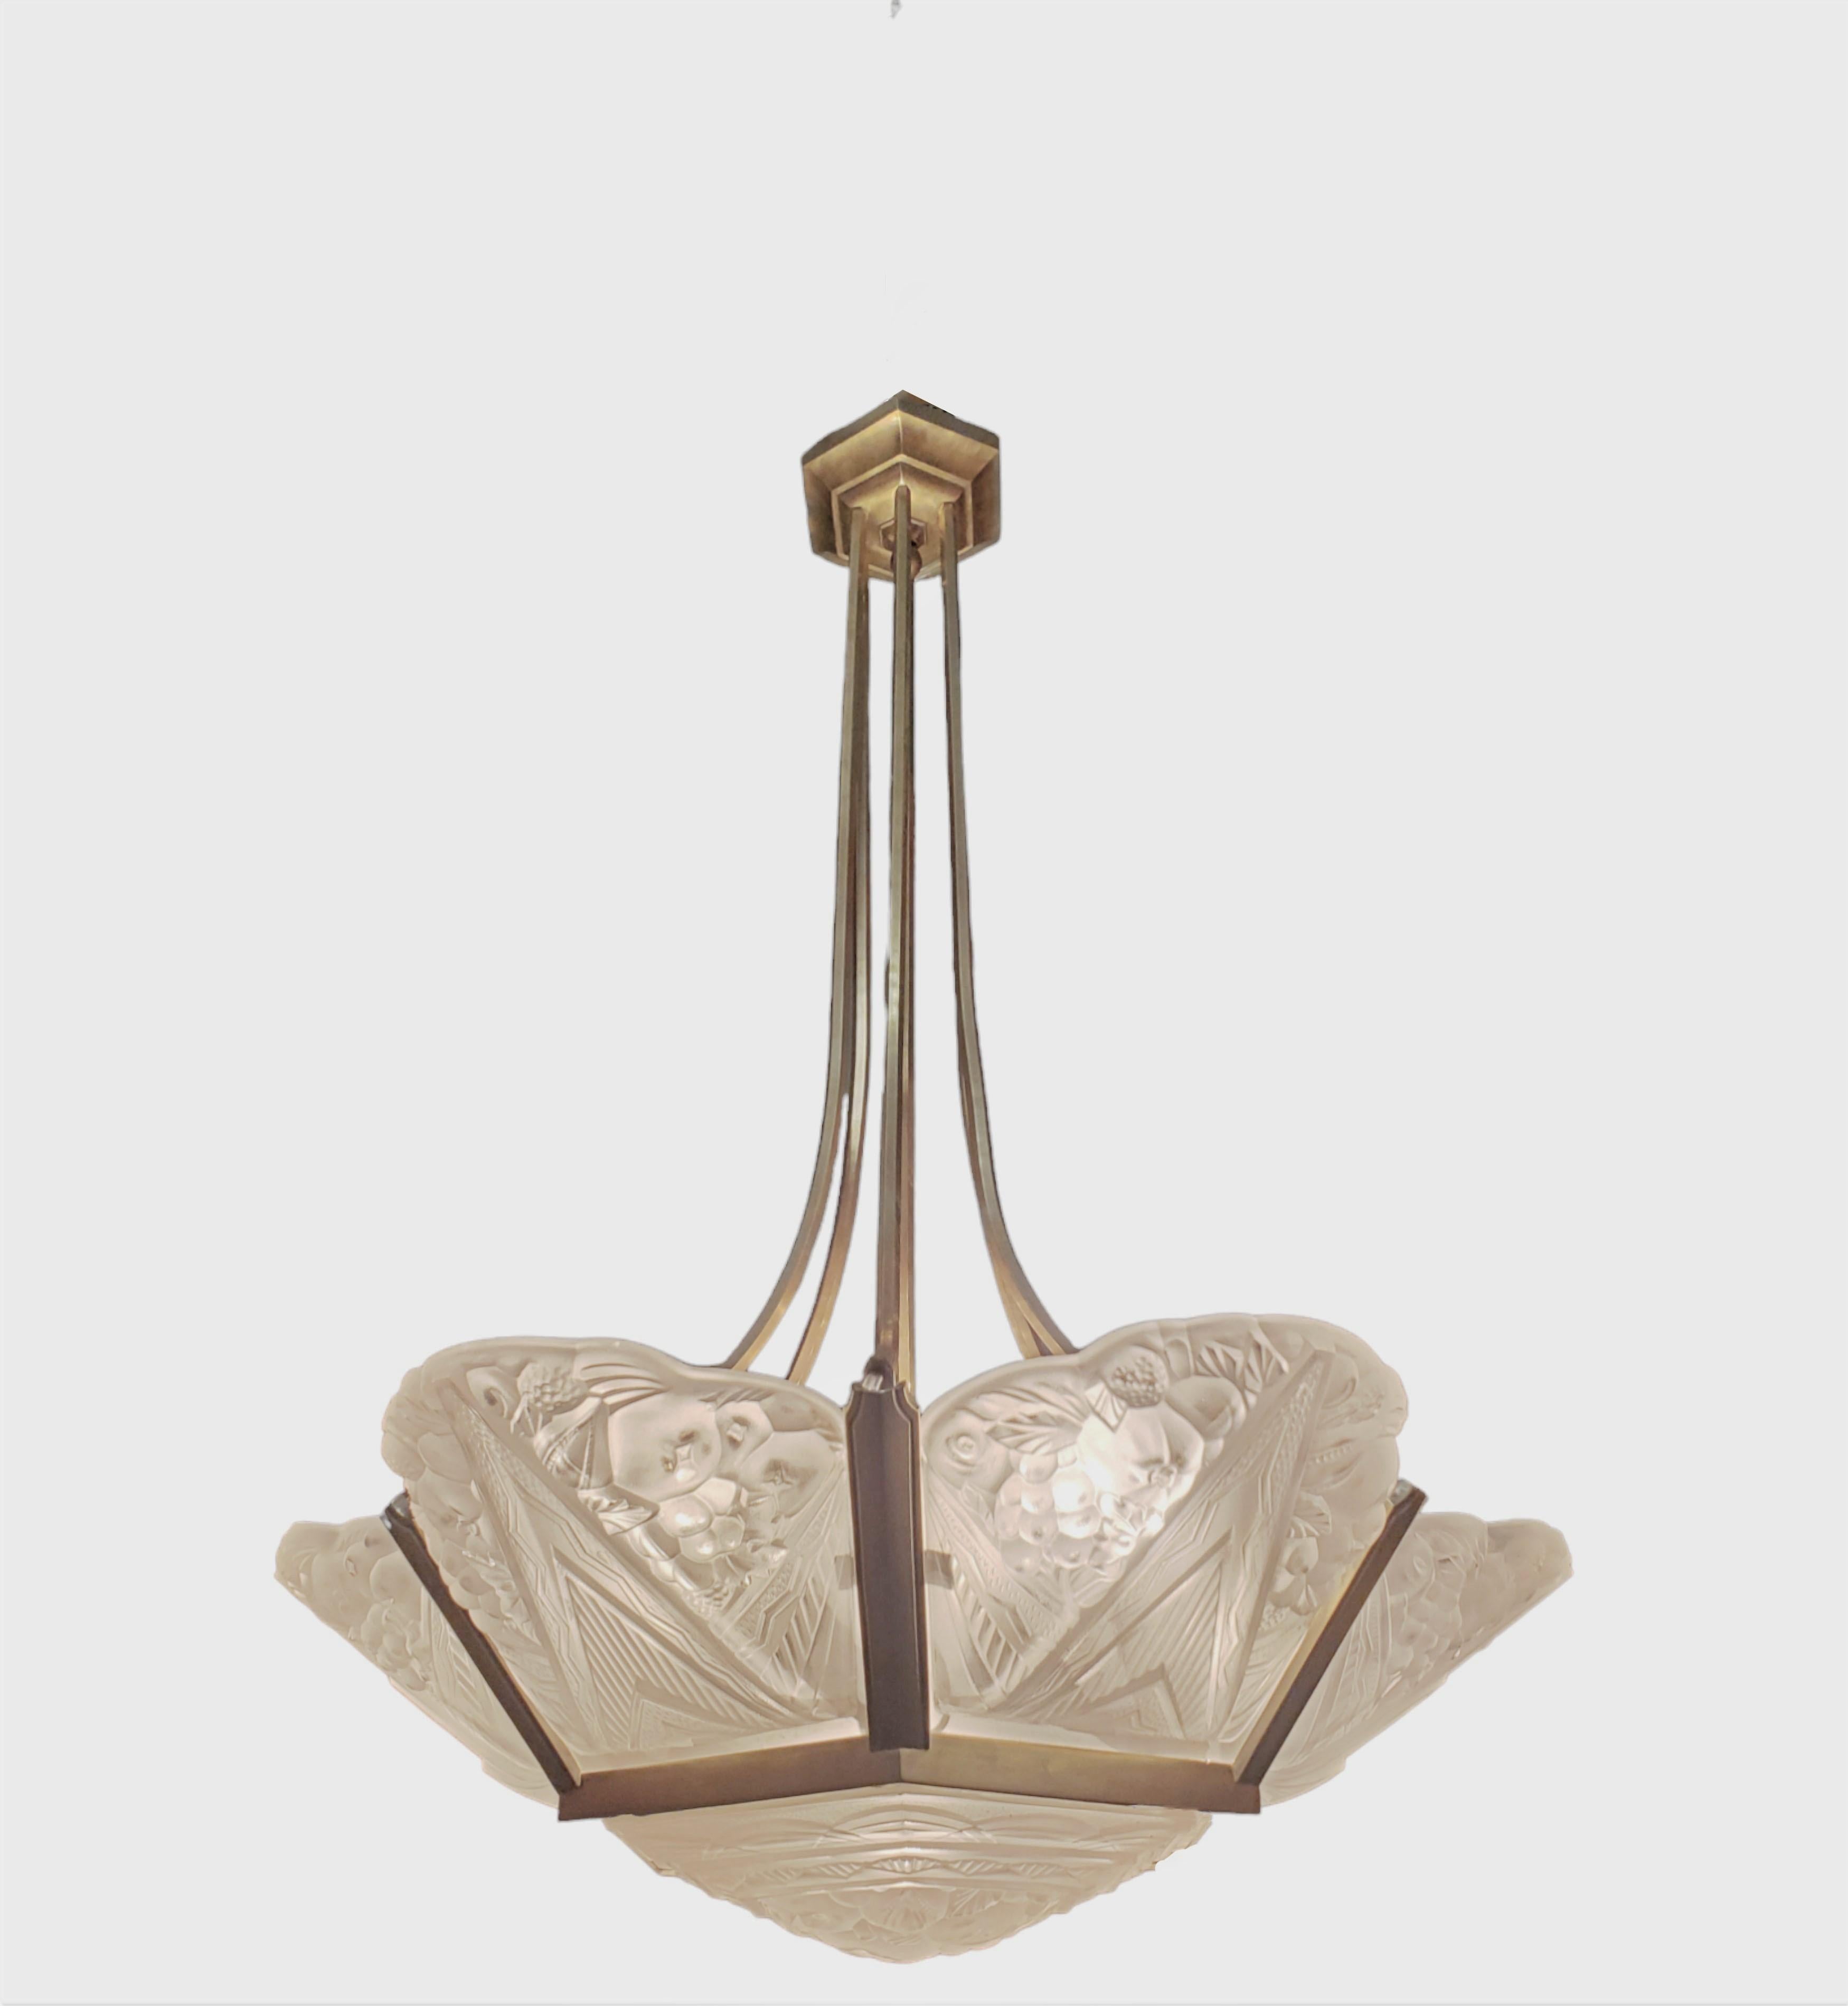 Original French Art Deco brass and art glass 6 panel + center chandelier -Sabino For Sale 9